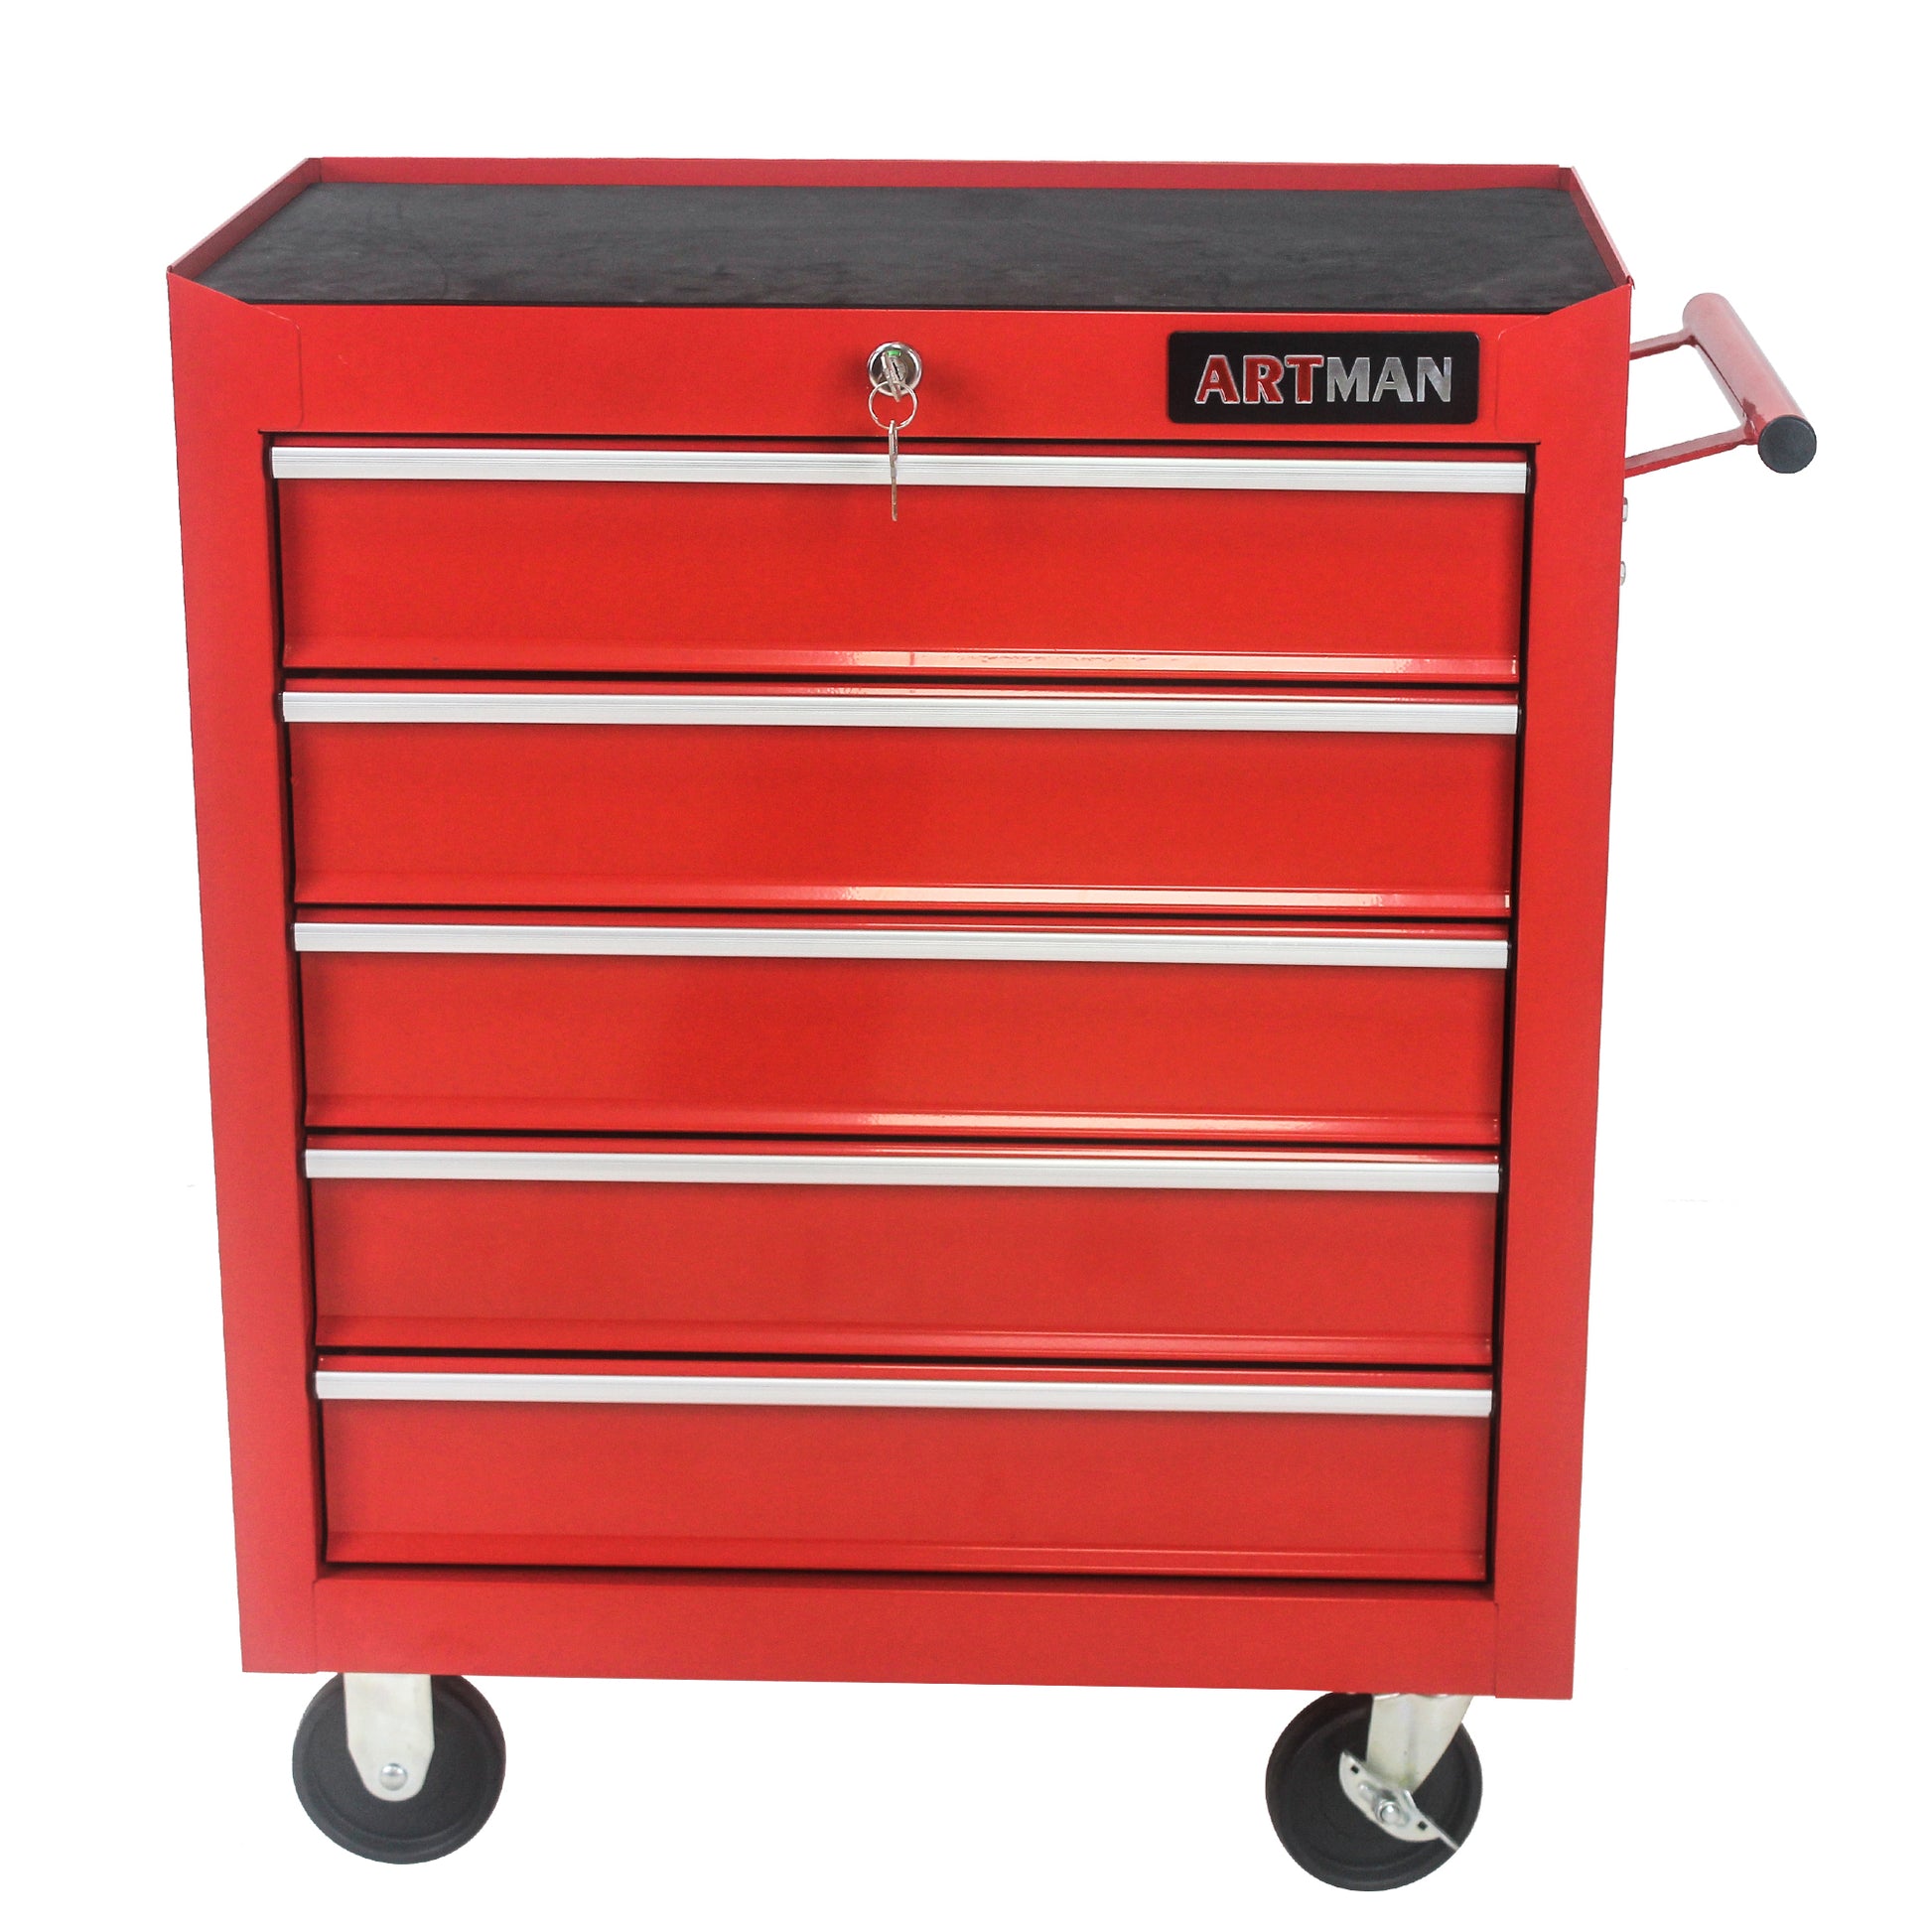 5 DRAWERS MULTIFUNCTIONAL TOOL CART WITH WHEELS RED red-steel